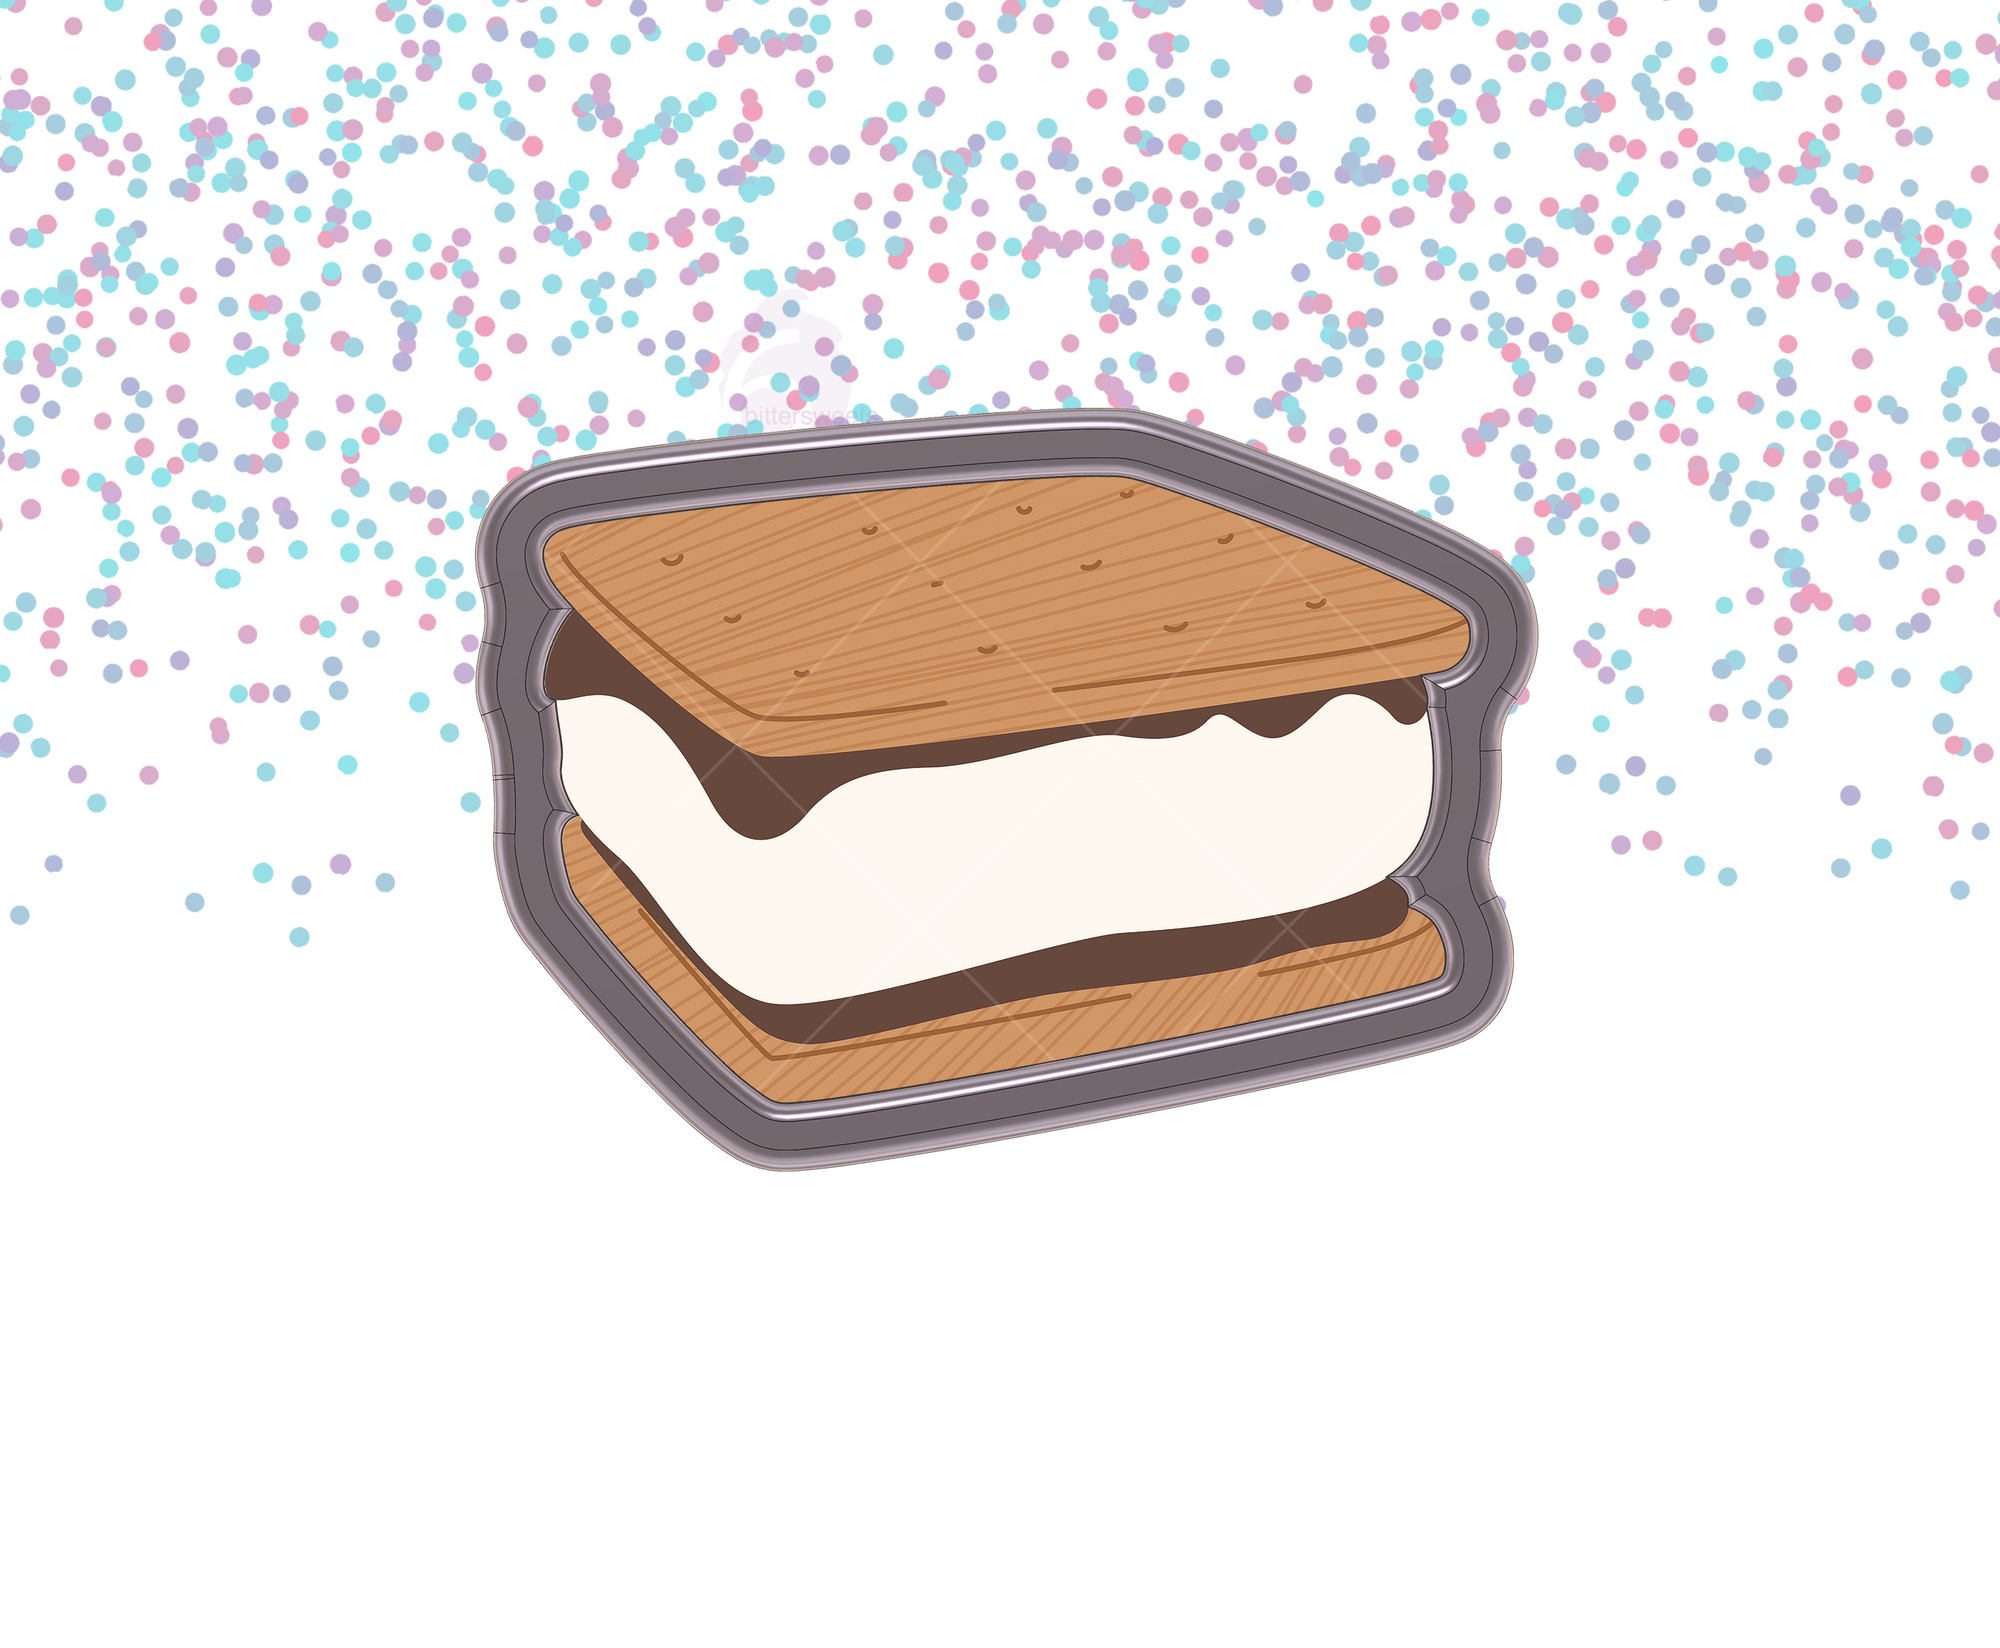 S'more 1 Cookie Cutter